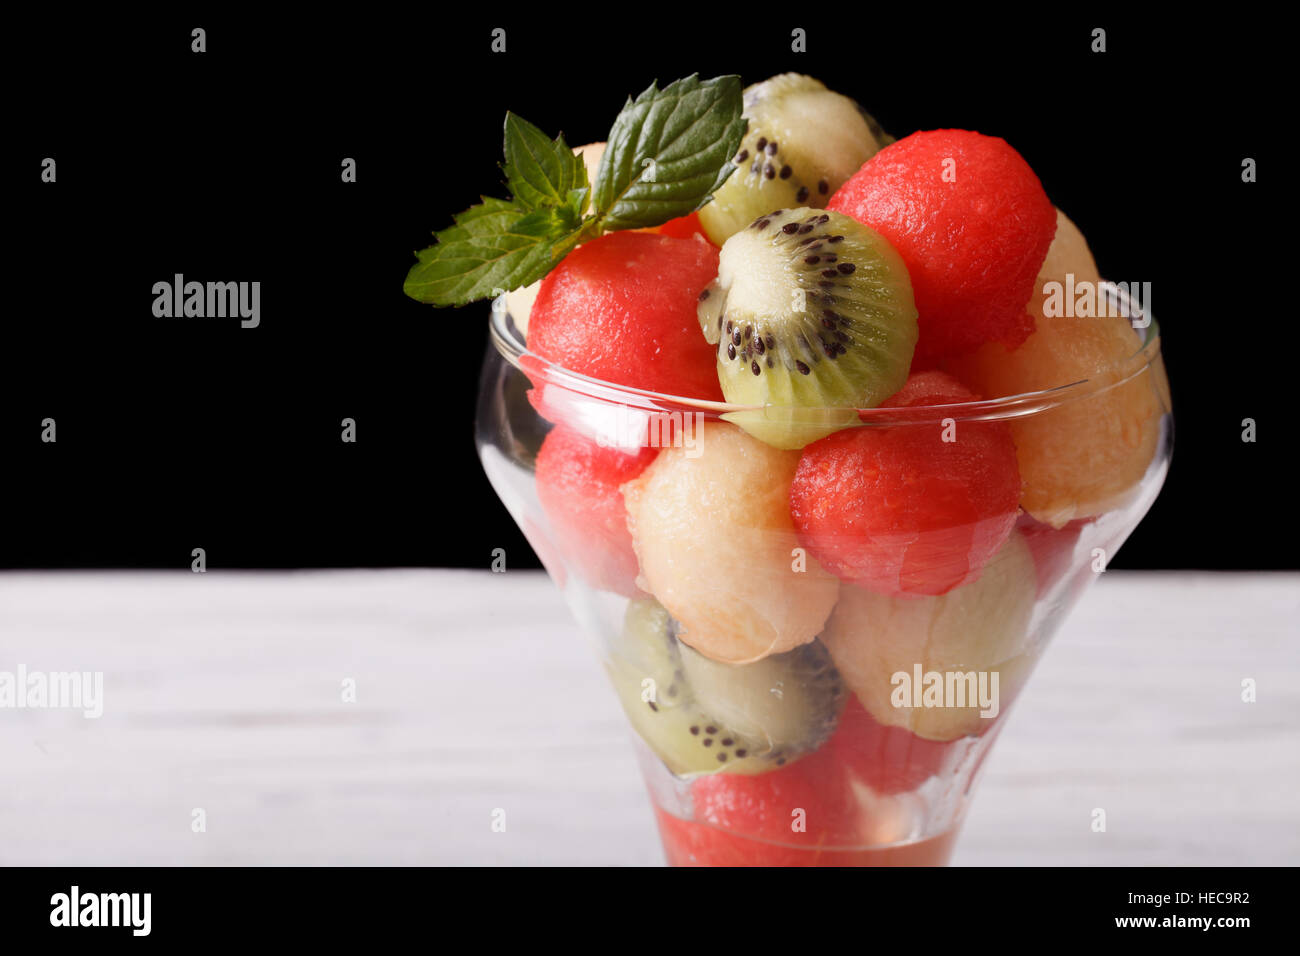 Fruit salad with watermelon, kiwi and melon in a glass closeup. horizontal on a dark background Stock Photo